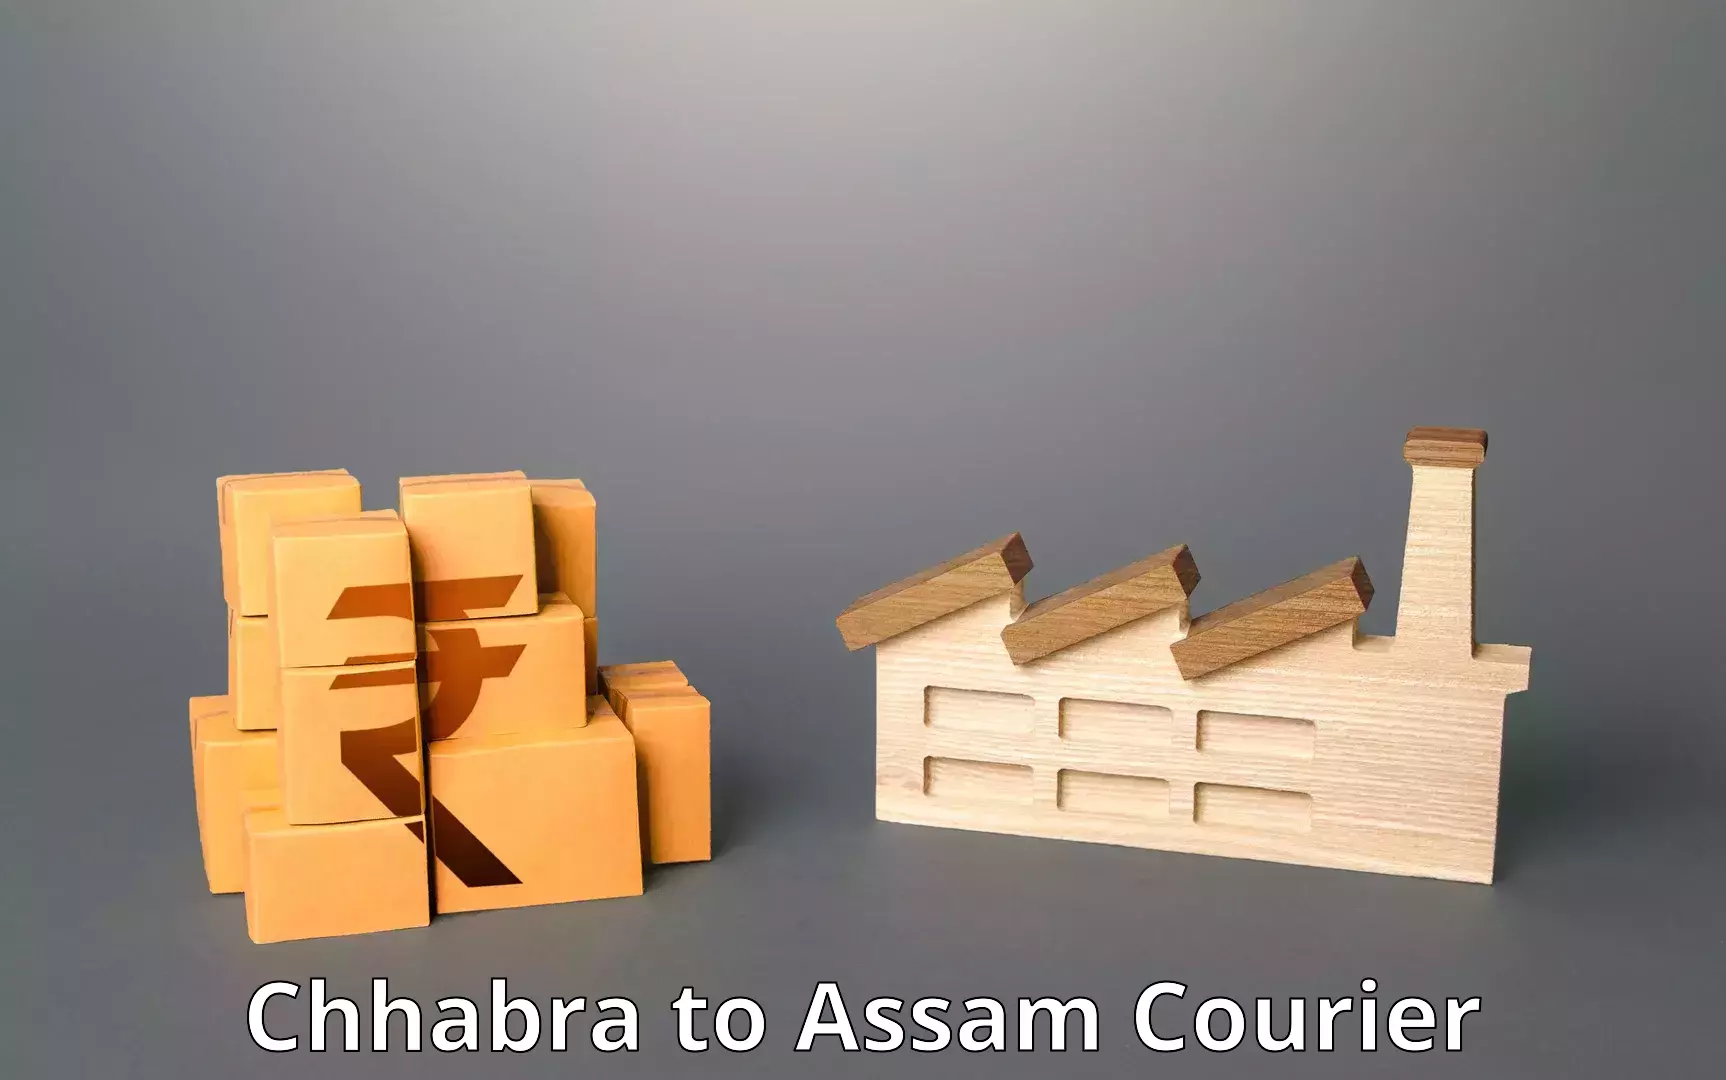 Package delivery network Chhabra to Assam